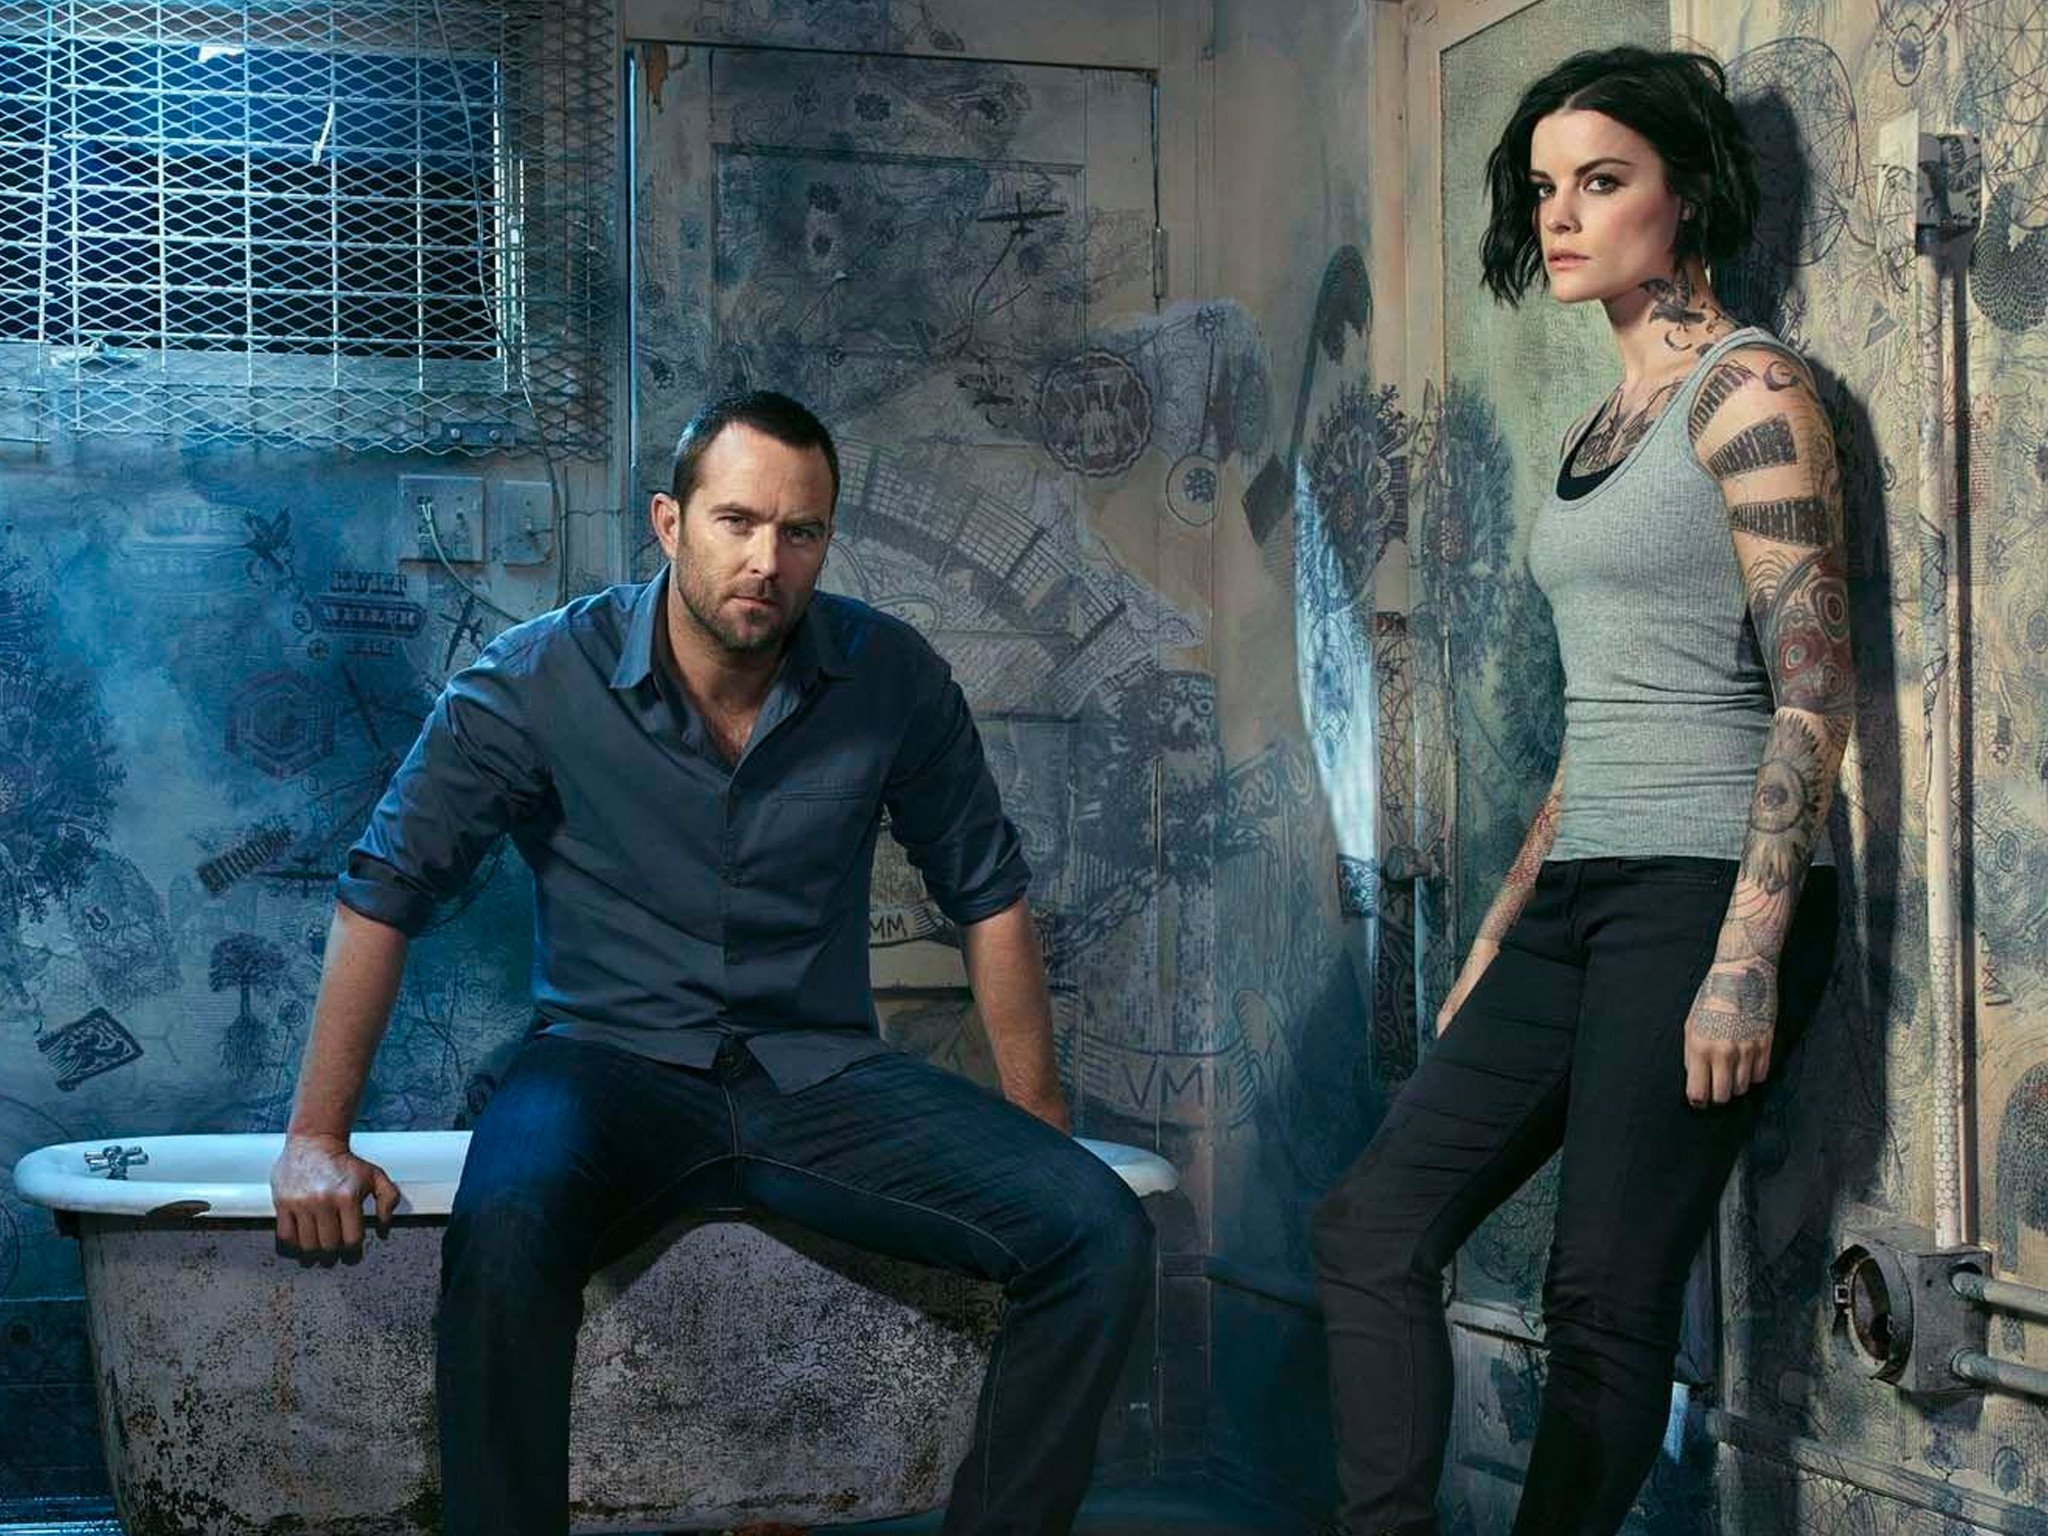 How to watch Blindspot: Stream Season 5 online from anywhere